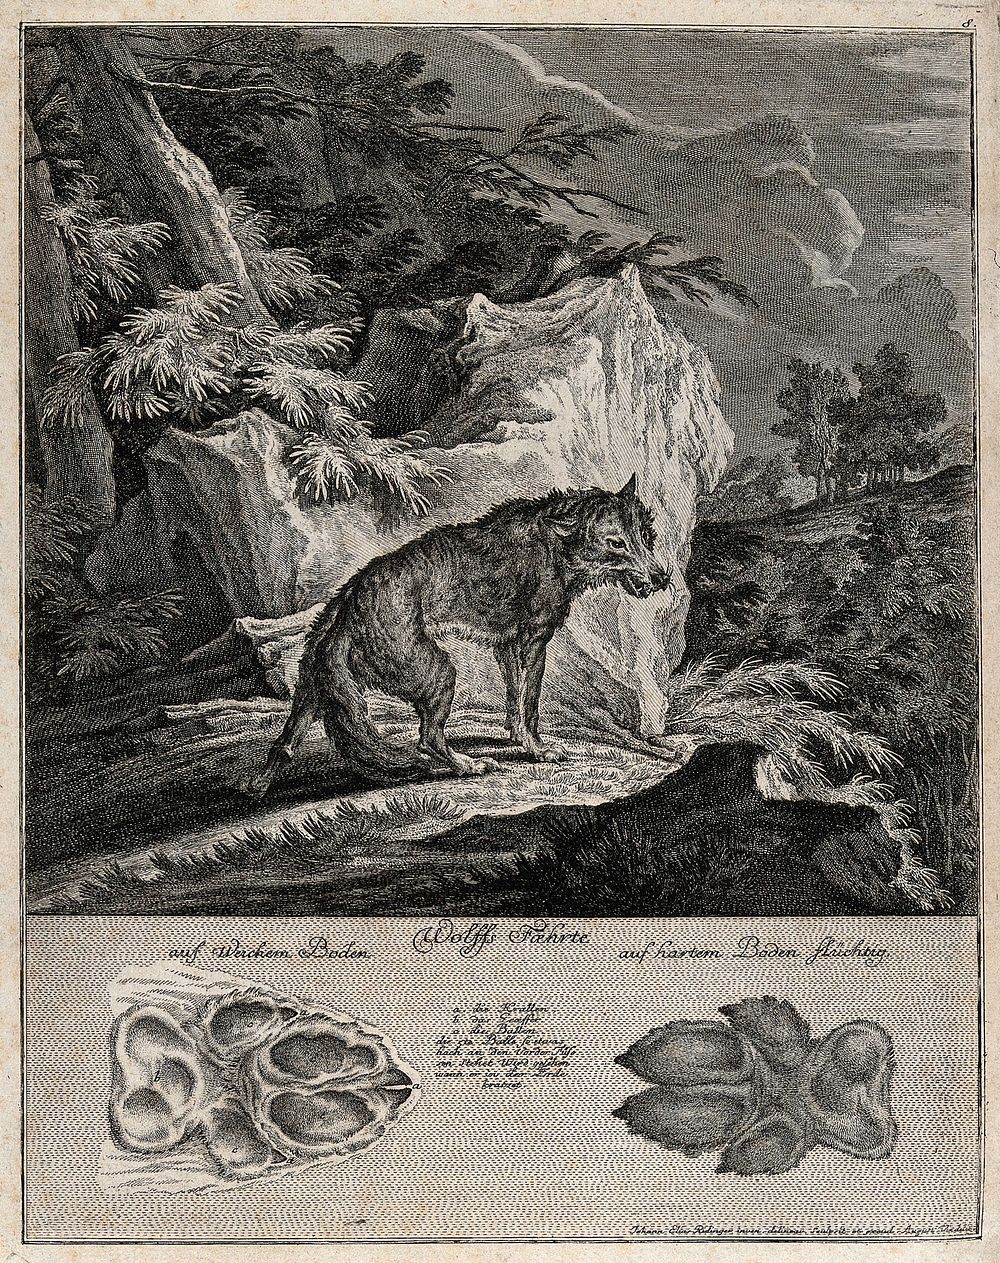 Above, an emaciated wolf in a rocky landscape, below, its tracks. Etching by J.E. Ridinger.